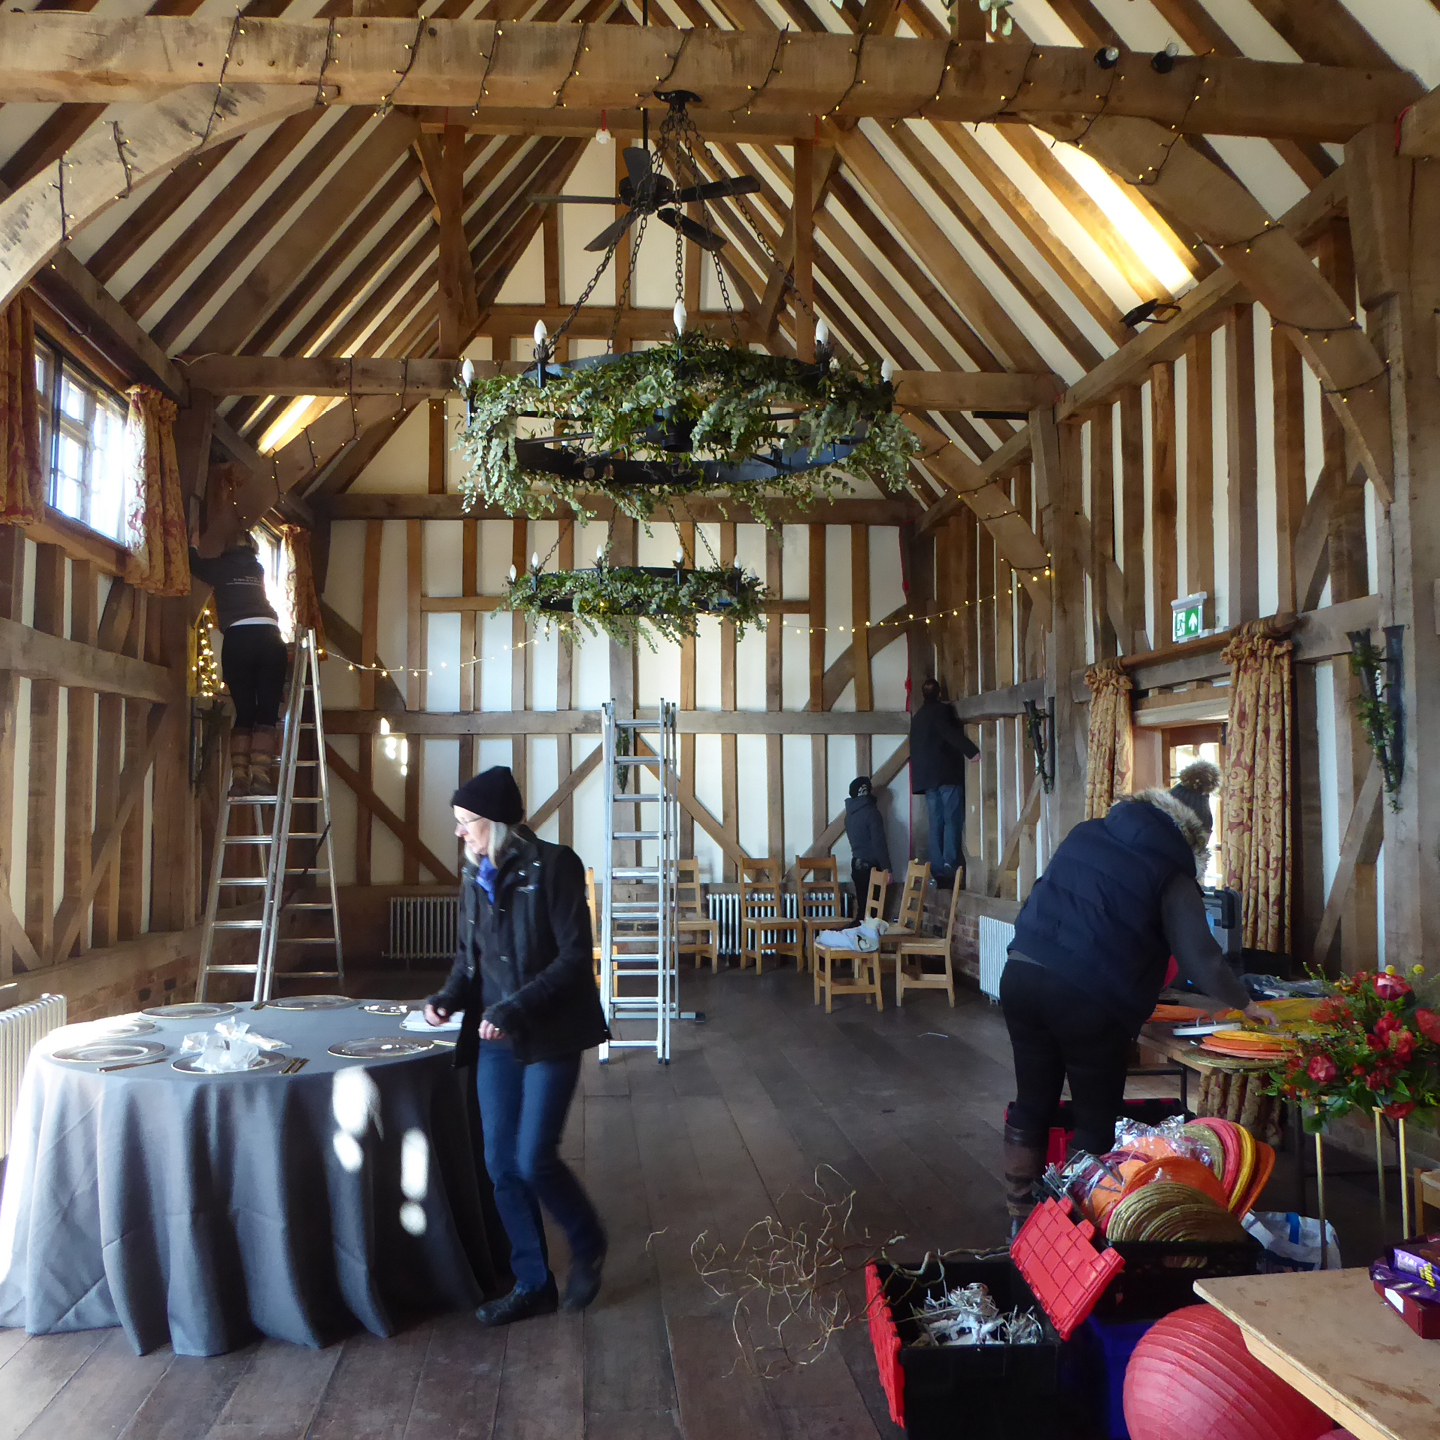 wedding suppliers preparing for a photoshoot at Gate Street Barn